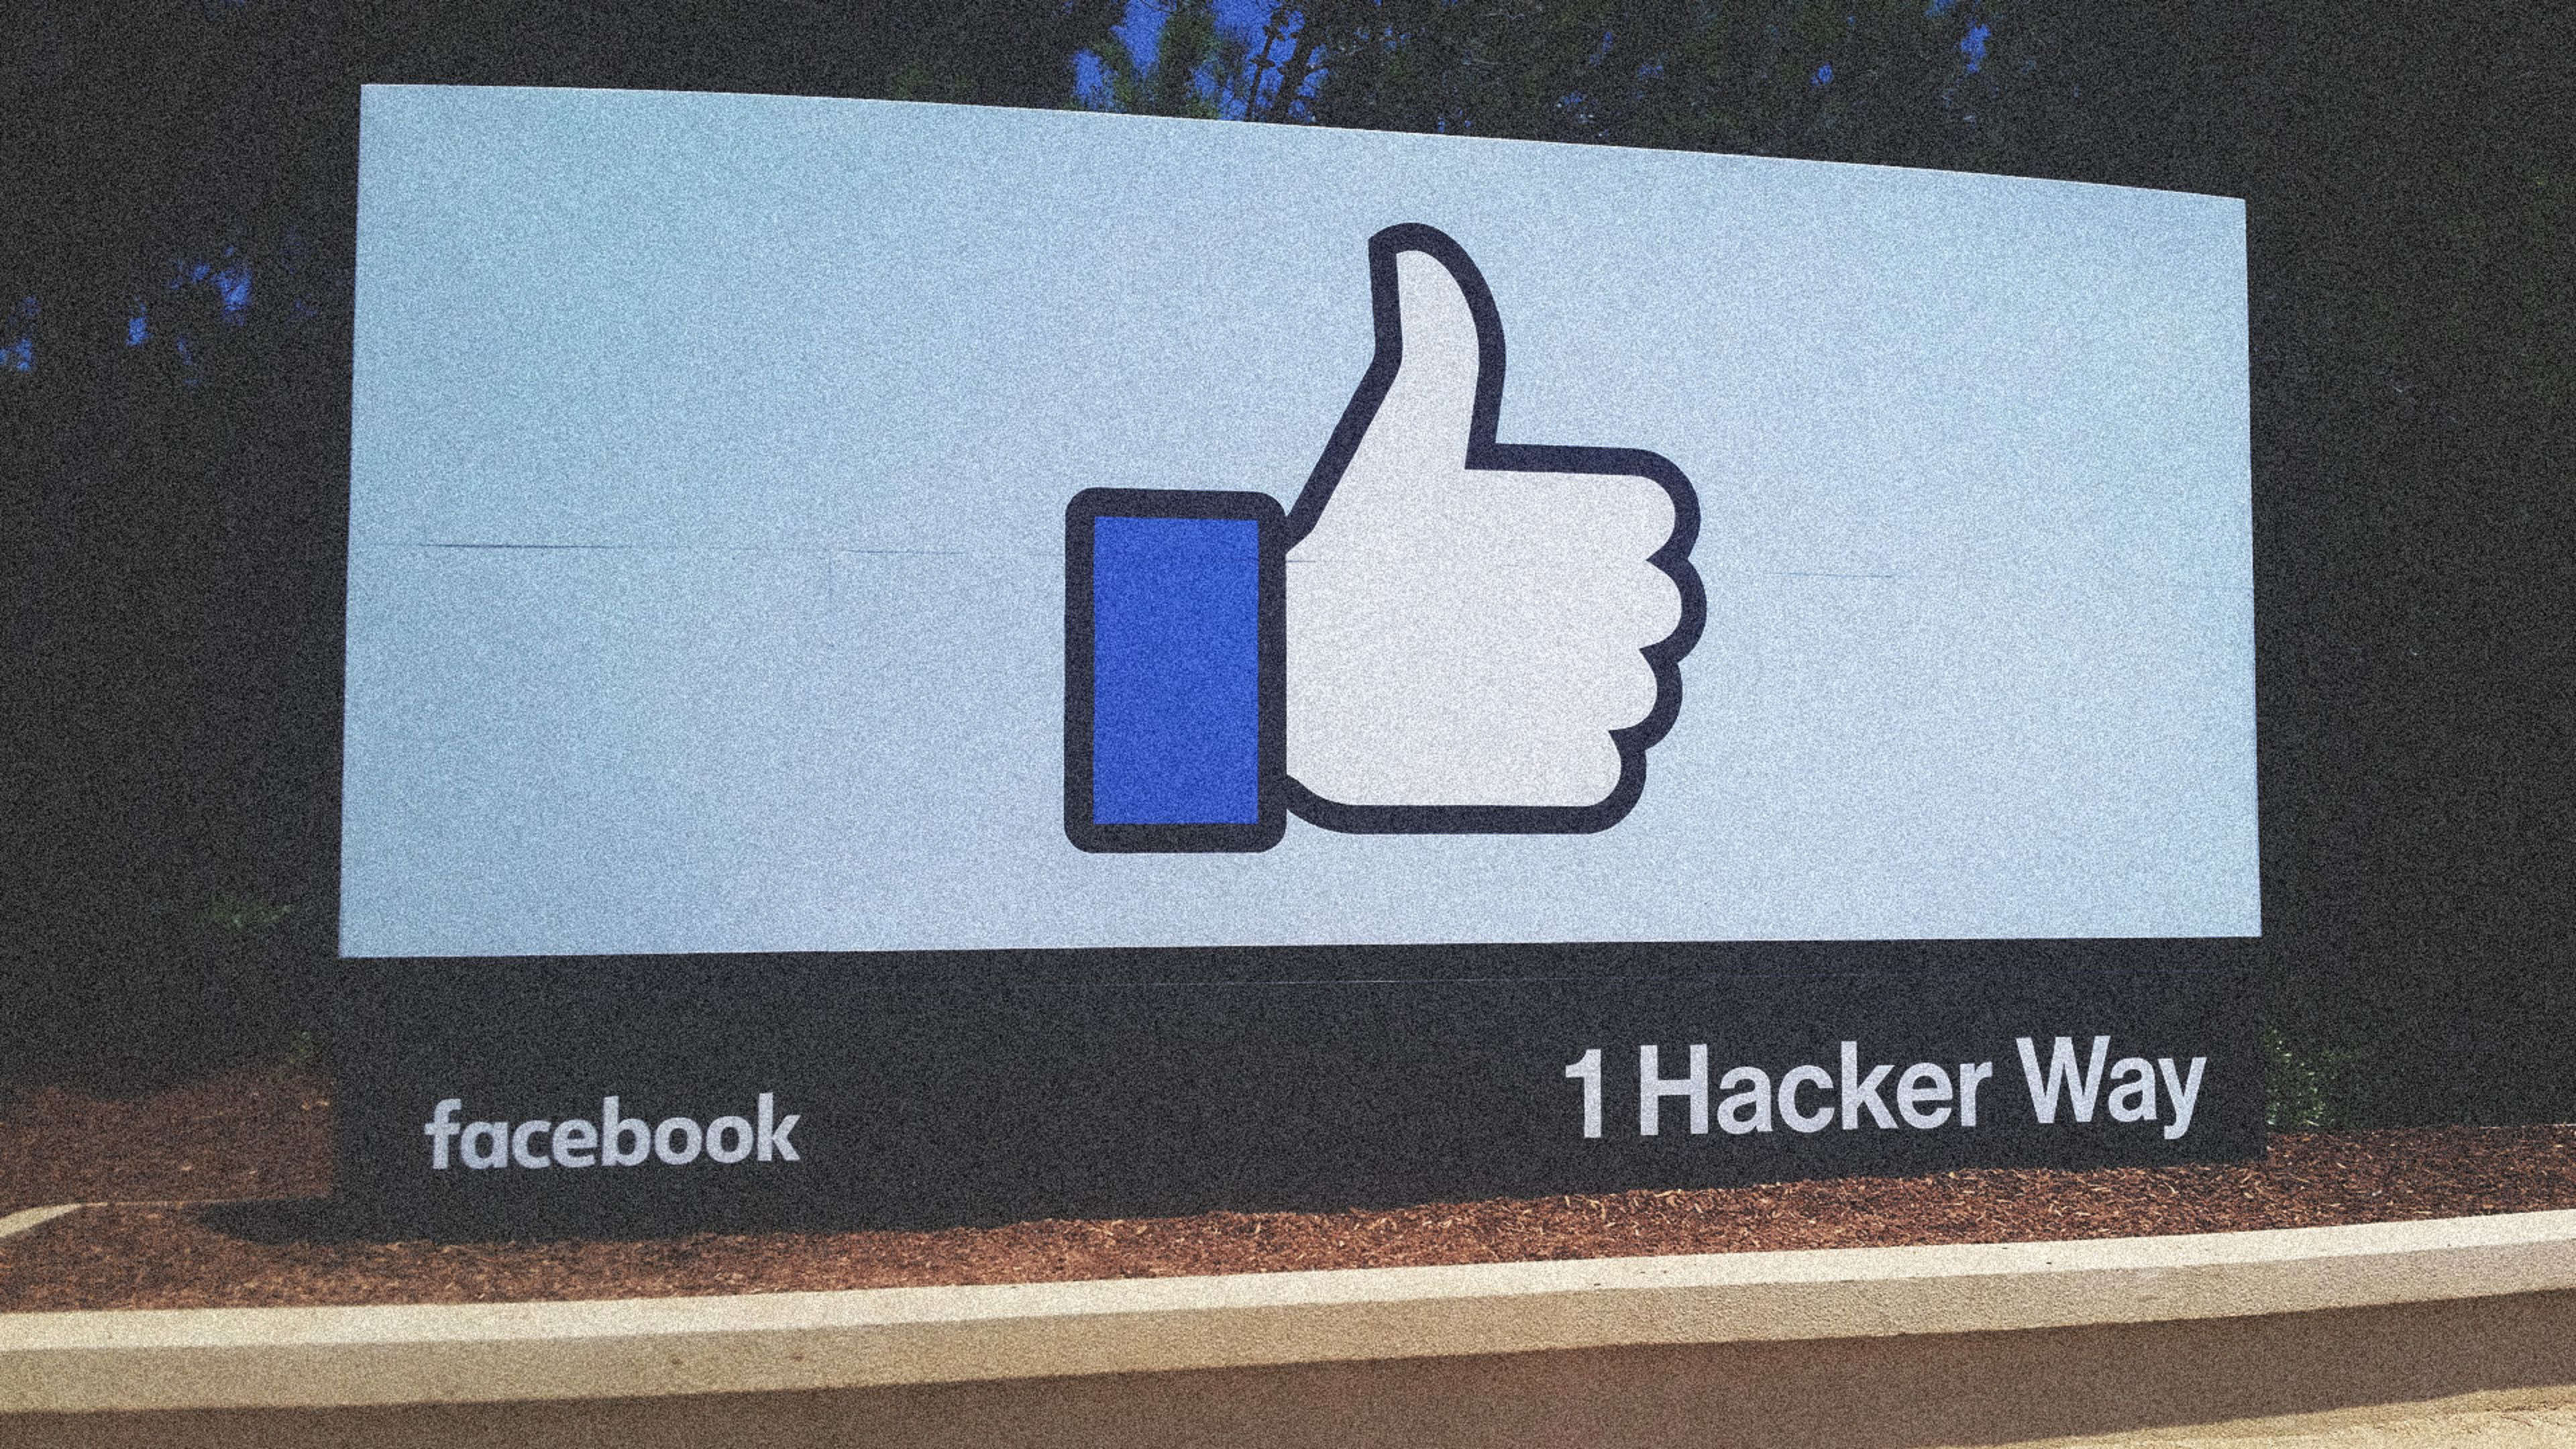 Facebook tries to make the FTC settlement sound like a cool new privacy feature